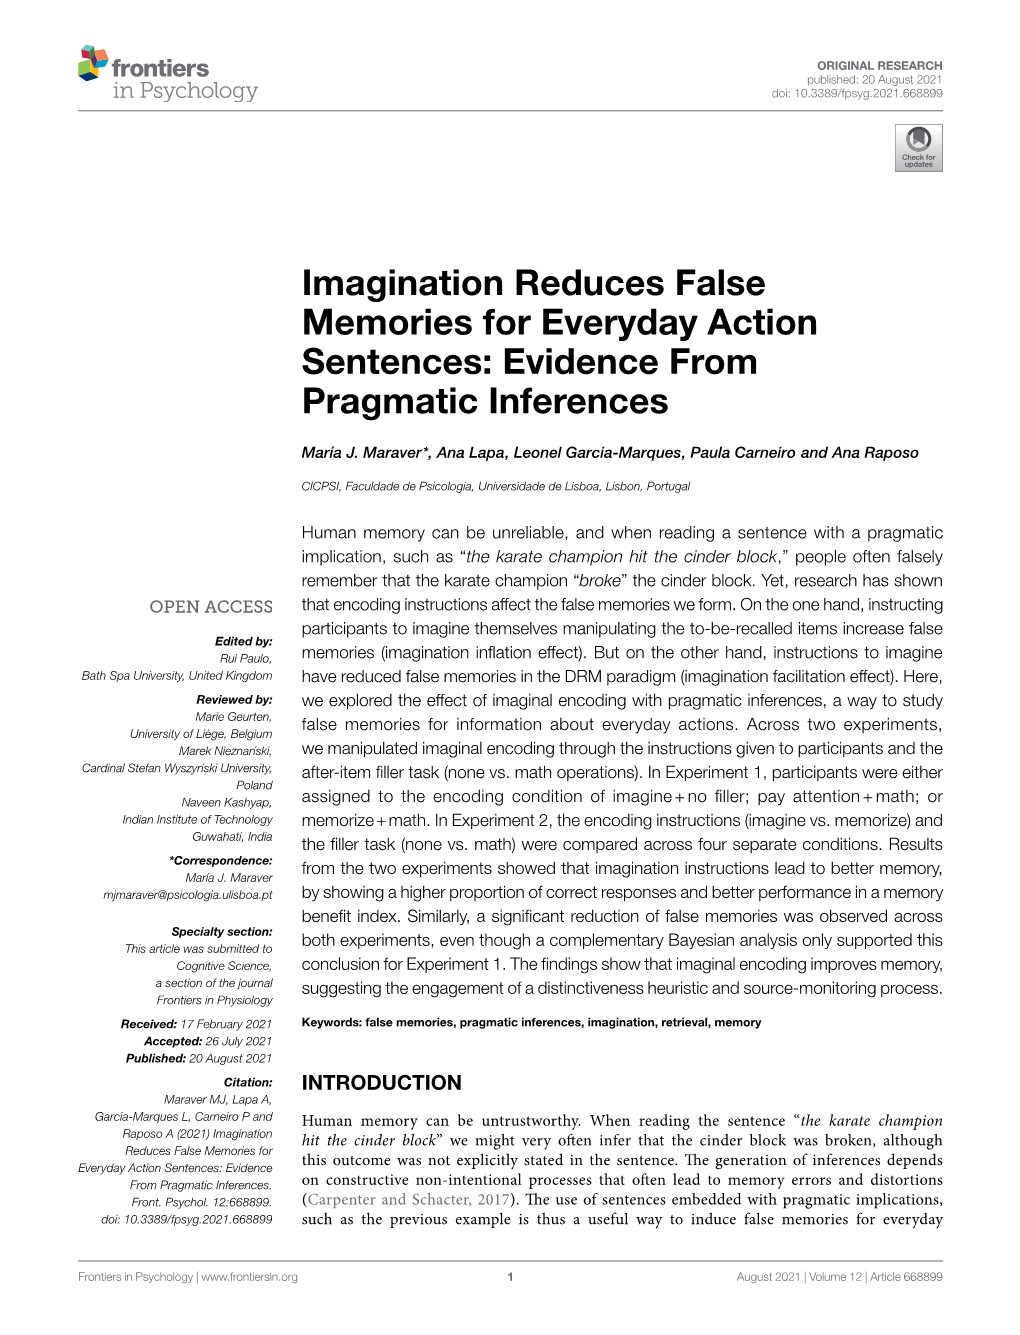 Imagination Reduces False Memories for Everyday Action Sentences: Evidence from Pragmatic Inferences